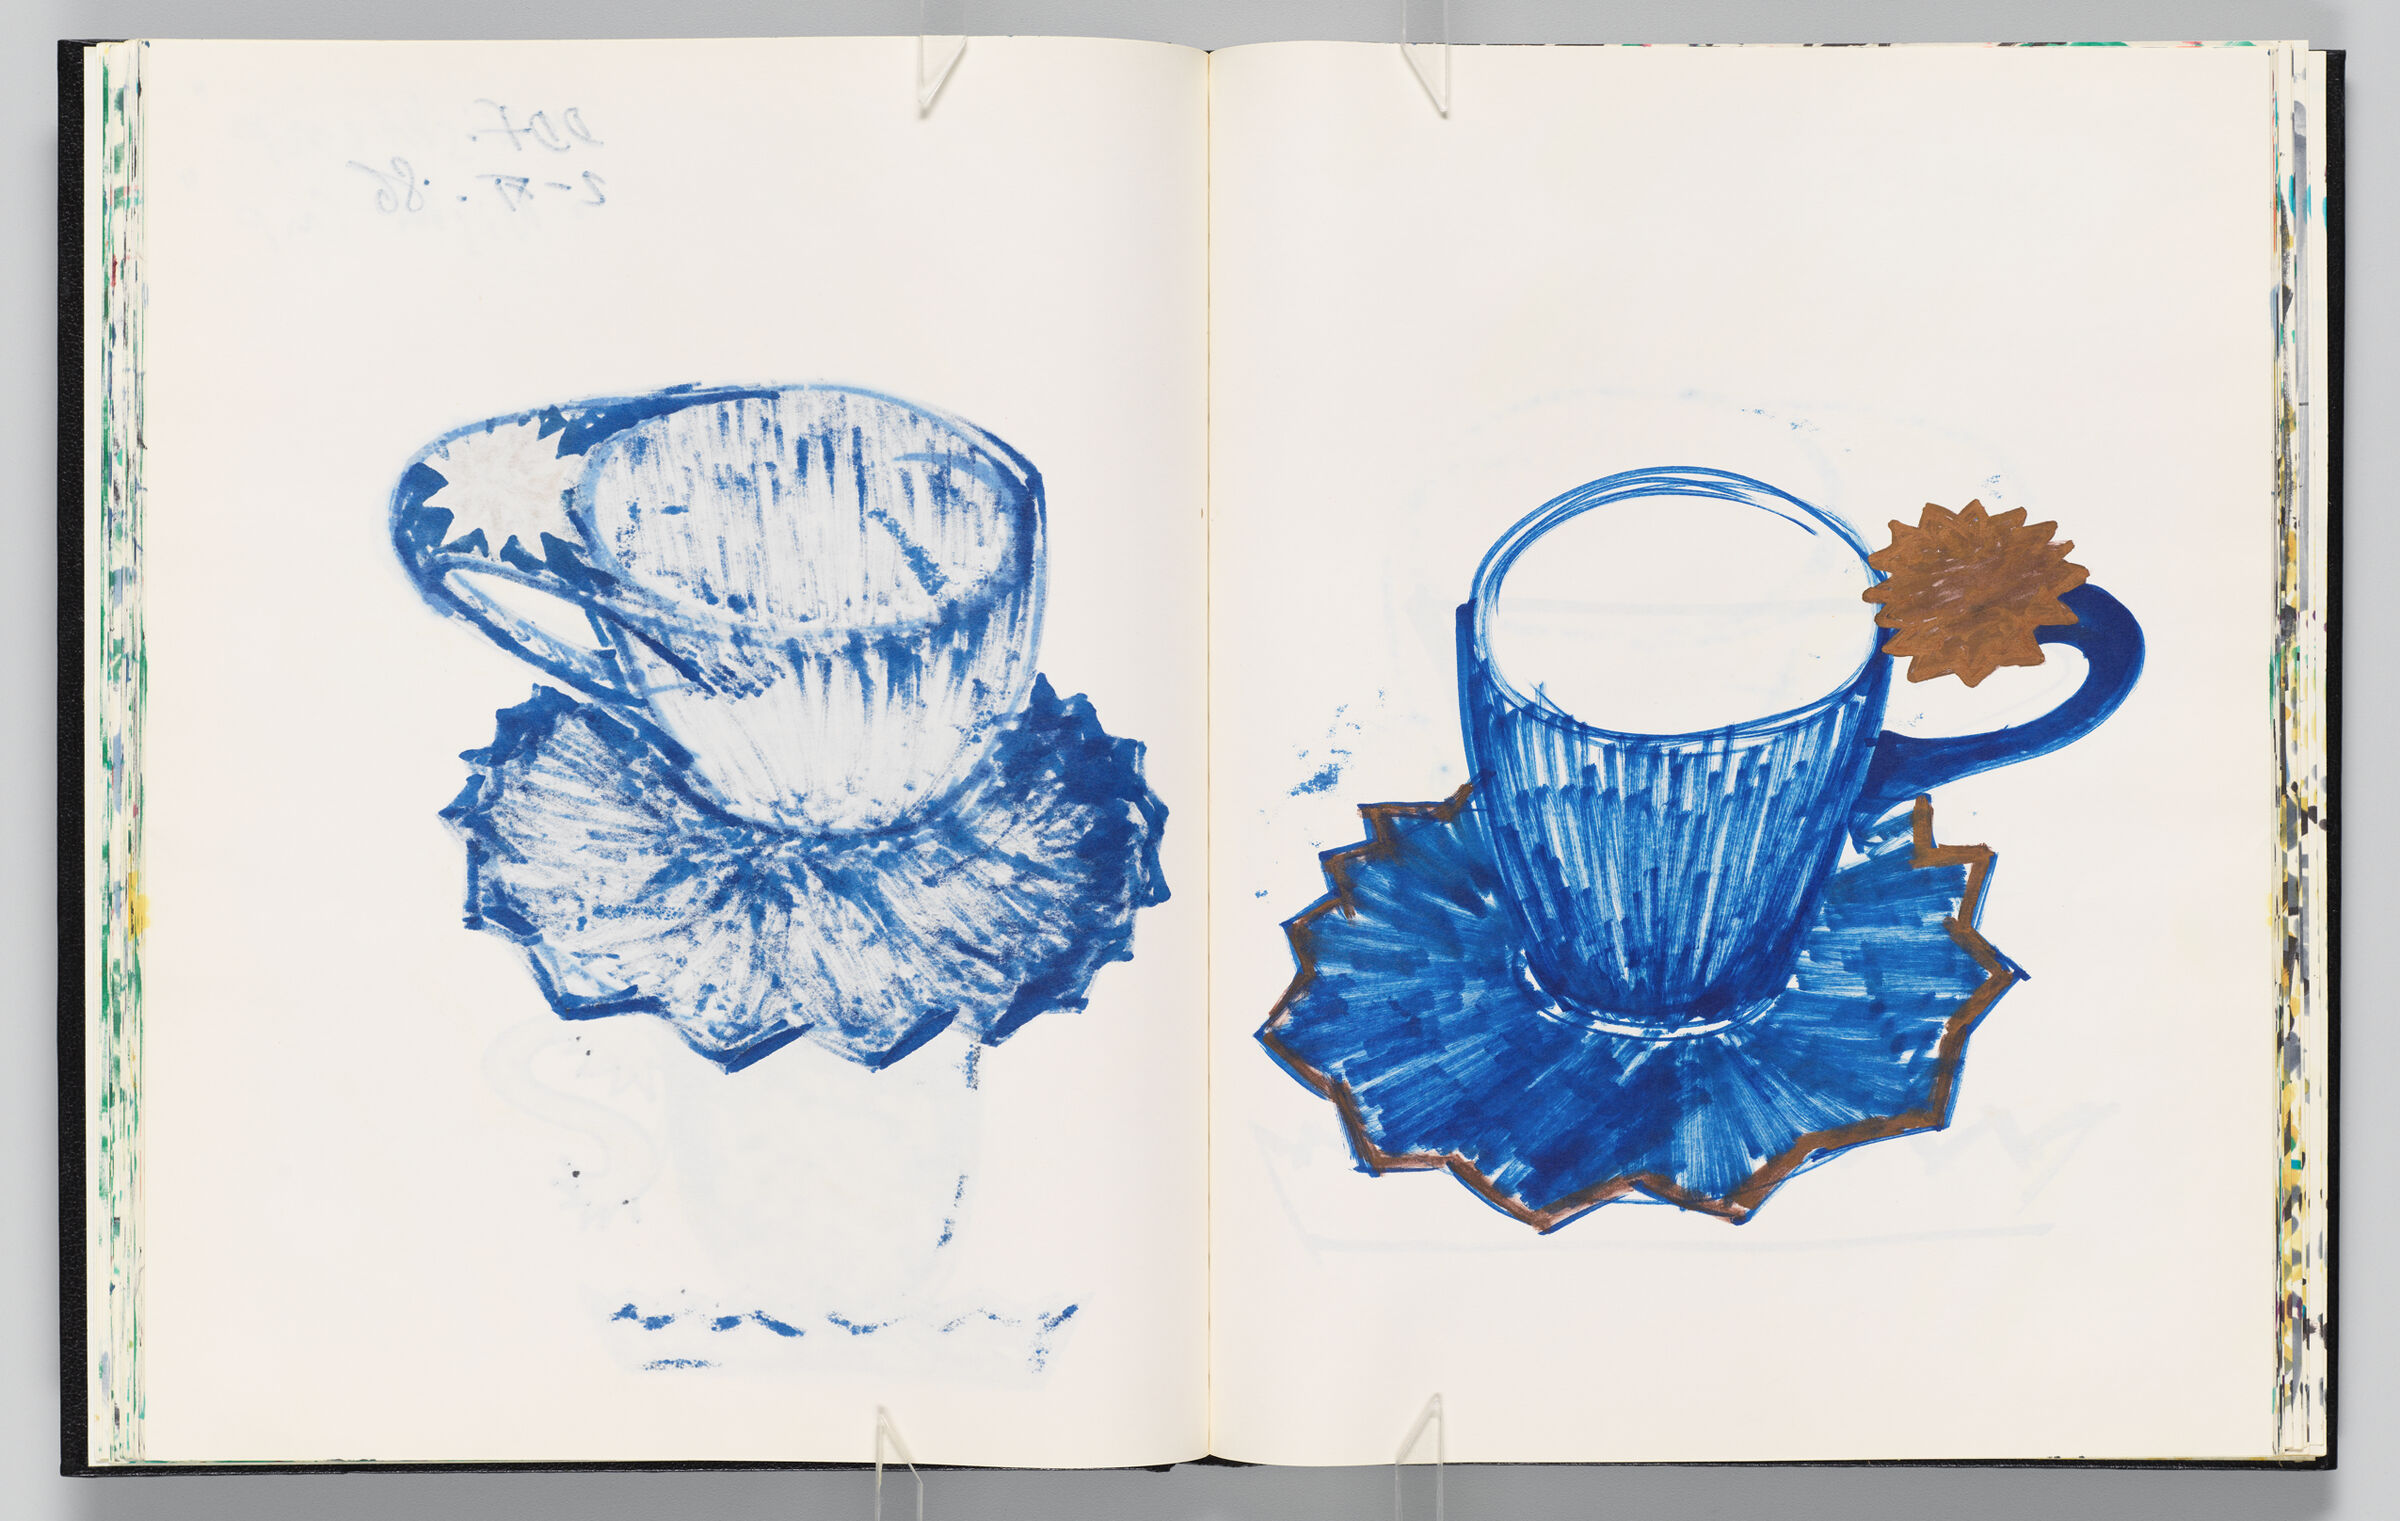 Untitled (Bleed-Through Of Previous Page, Left Page); Untitled (Rosenthal 